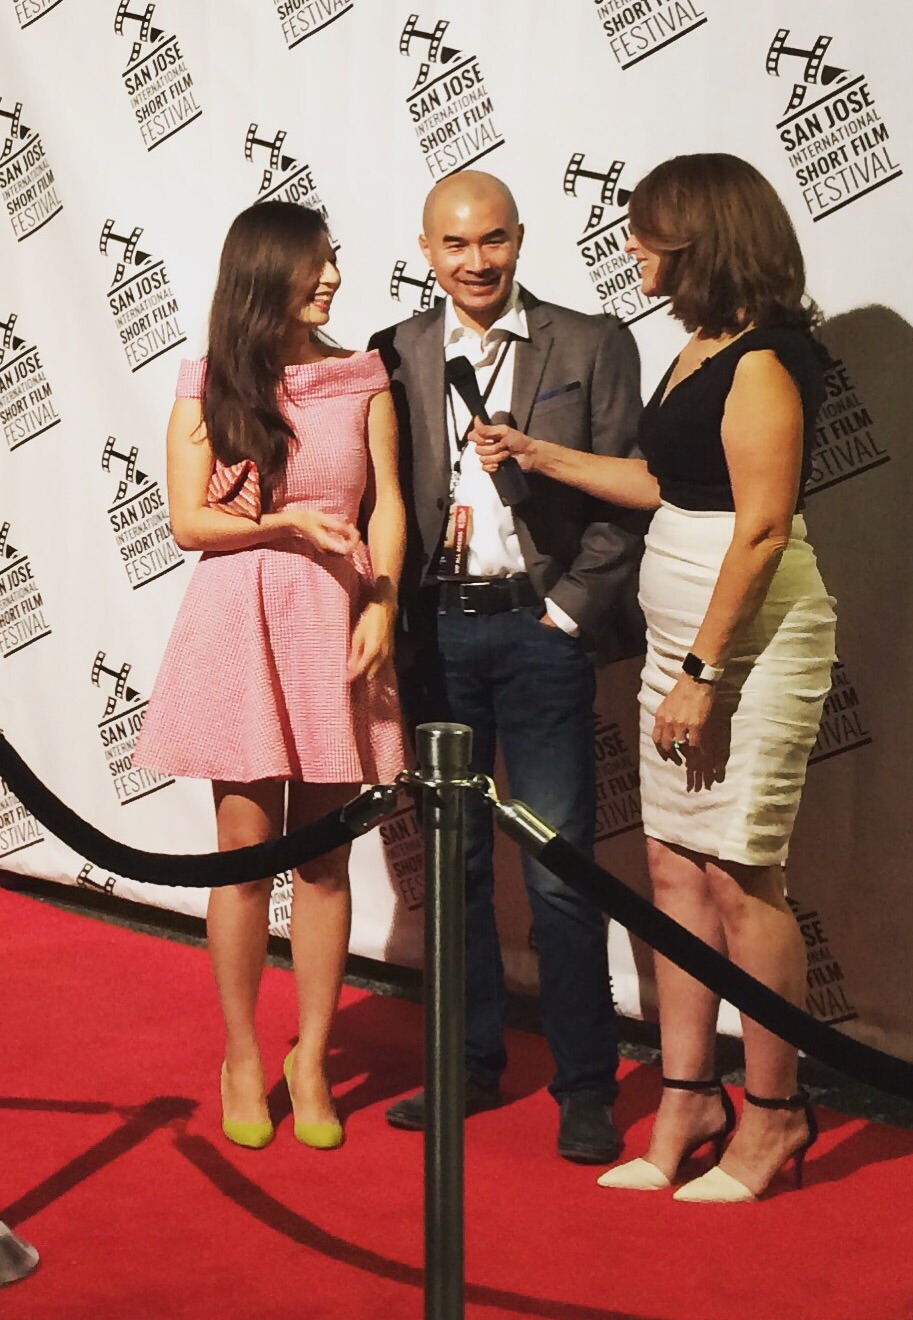 Katherine Park and Ed Moy on red carpet at San Jose International Short Film Festival with Marcella Cortland.